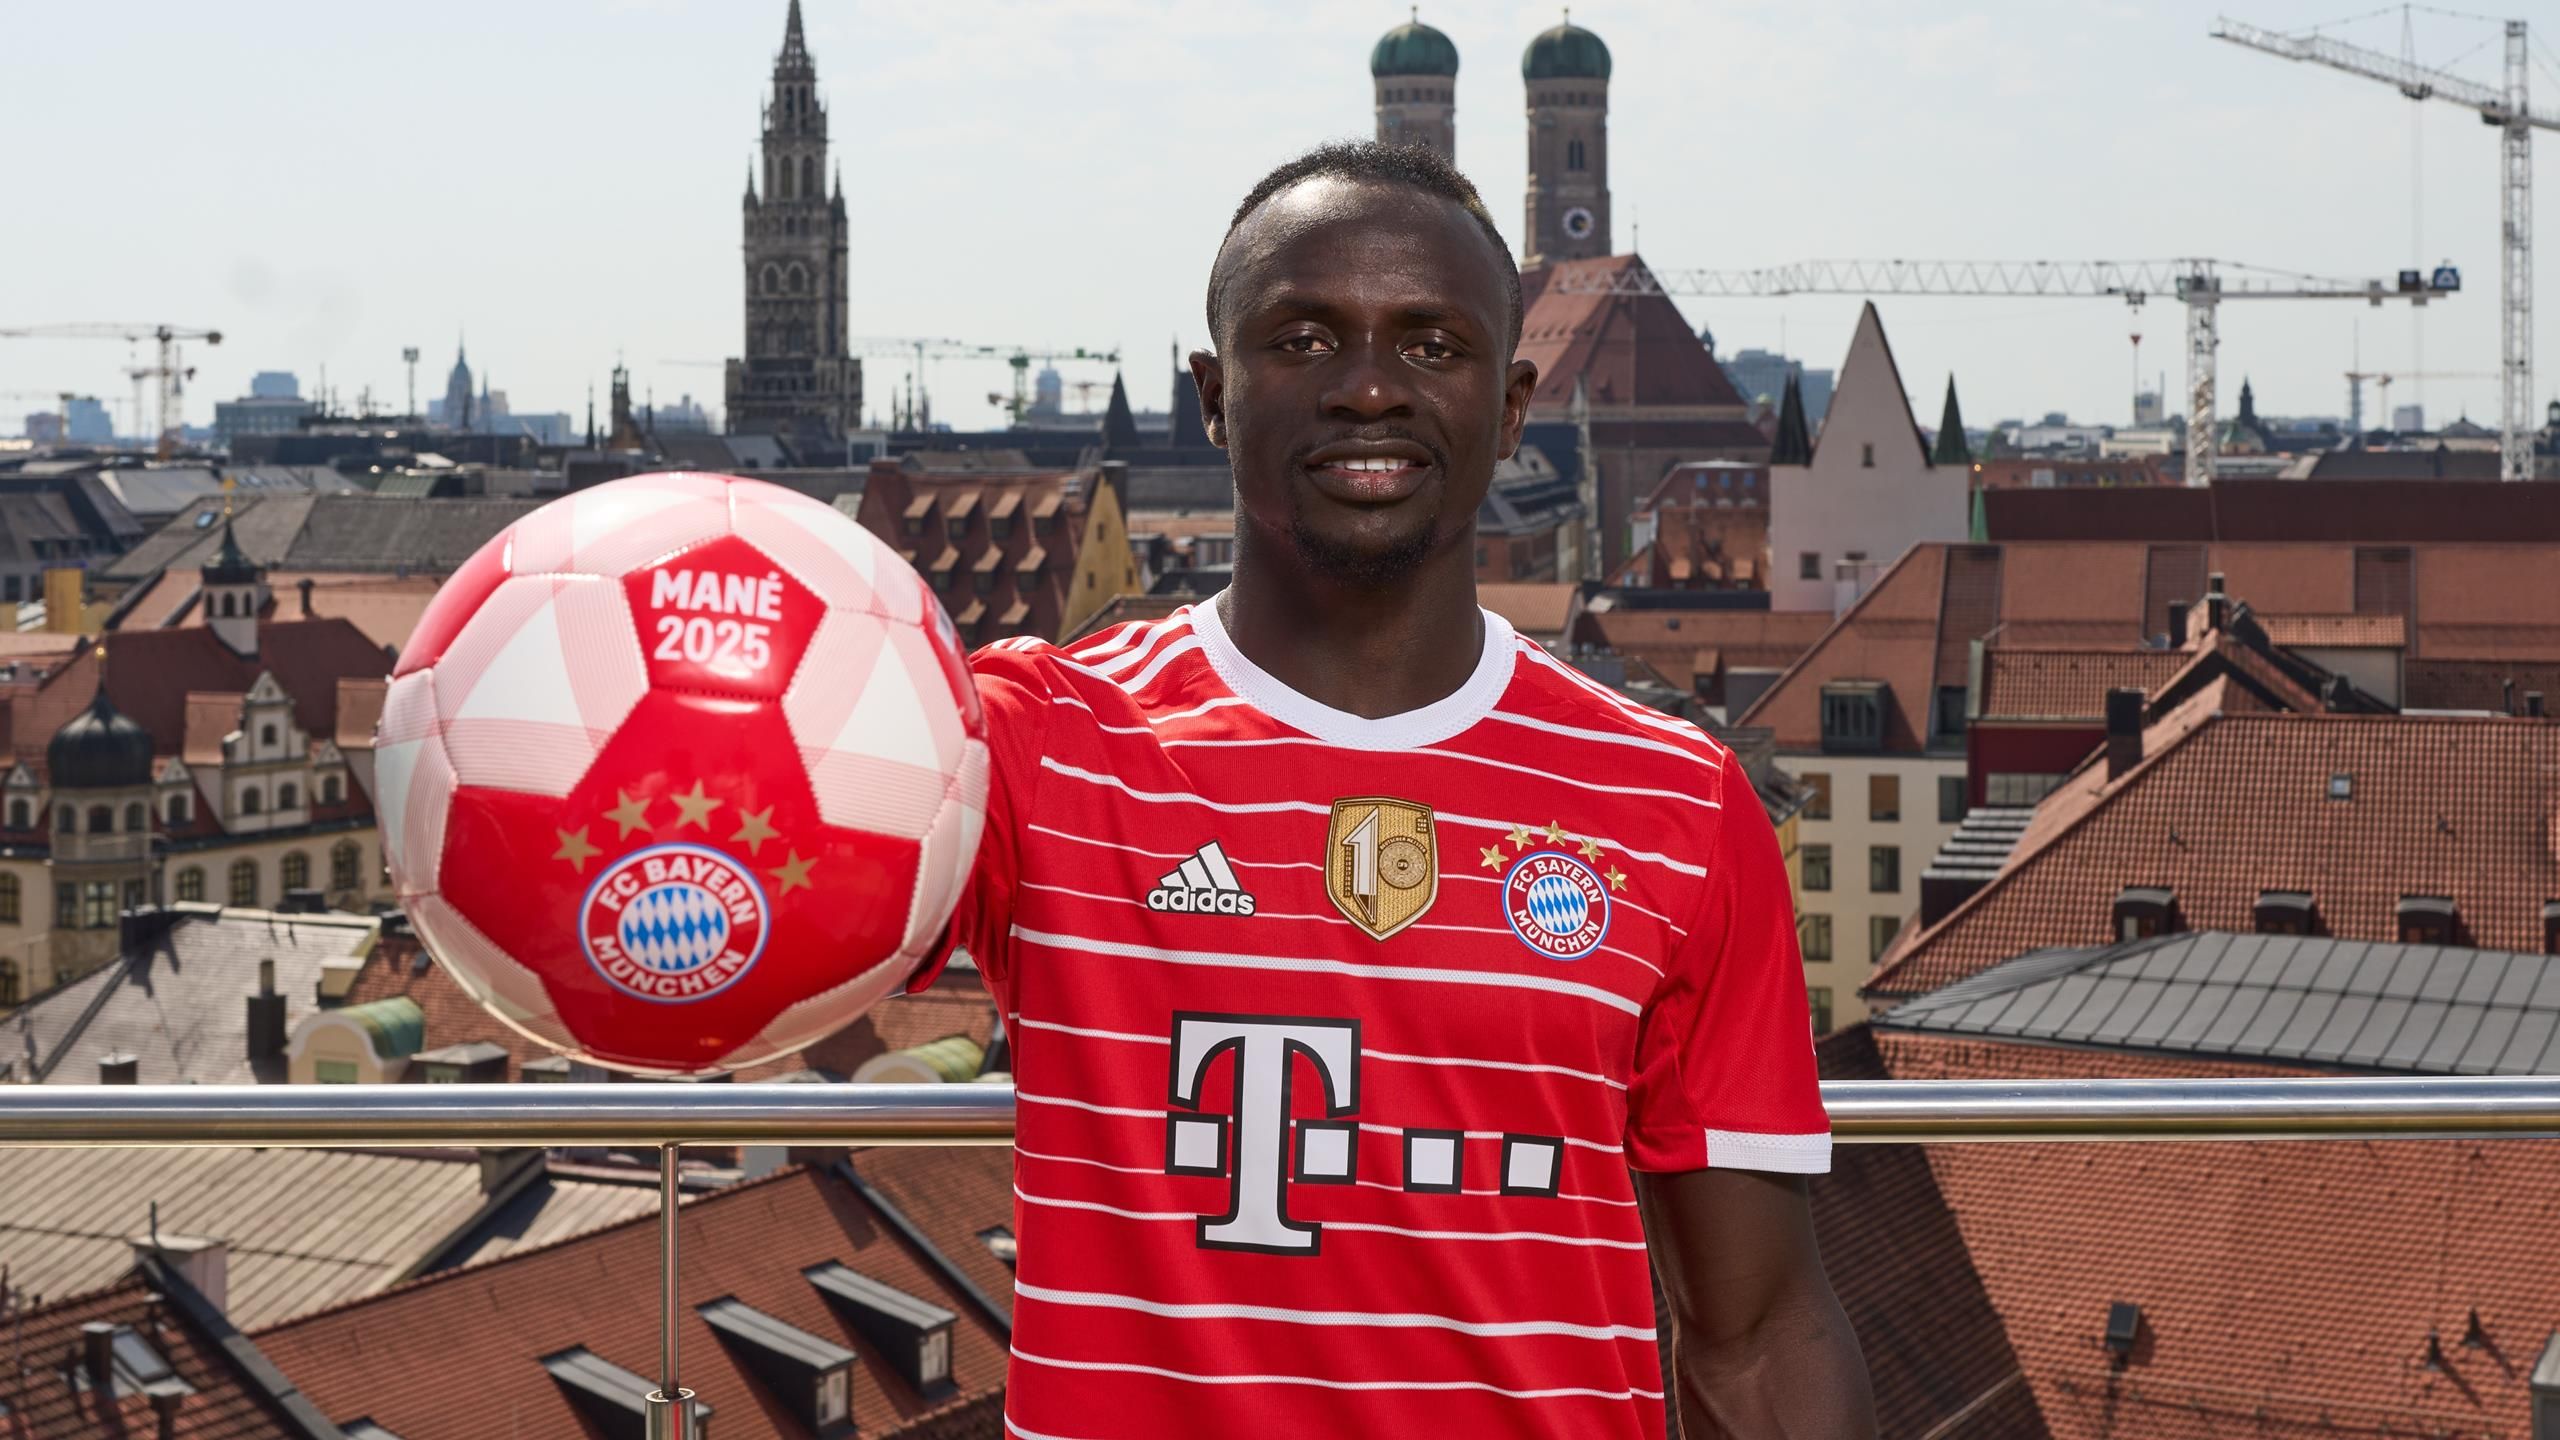 Sadio Mane Joins Bayern Munich From Liverpool On A Three Year Contract For £35m 'The Right Time For This Challenge'